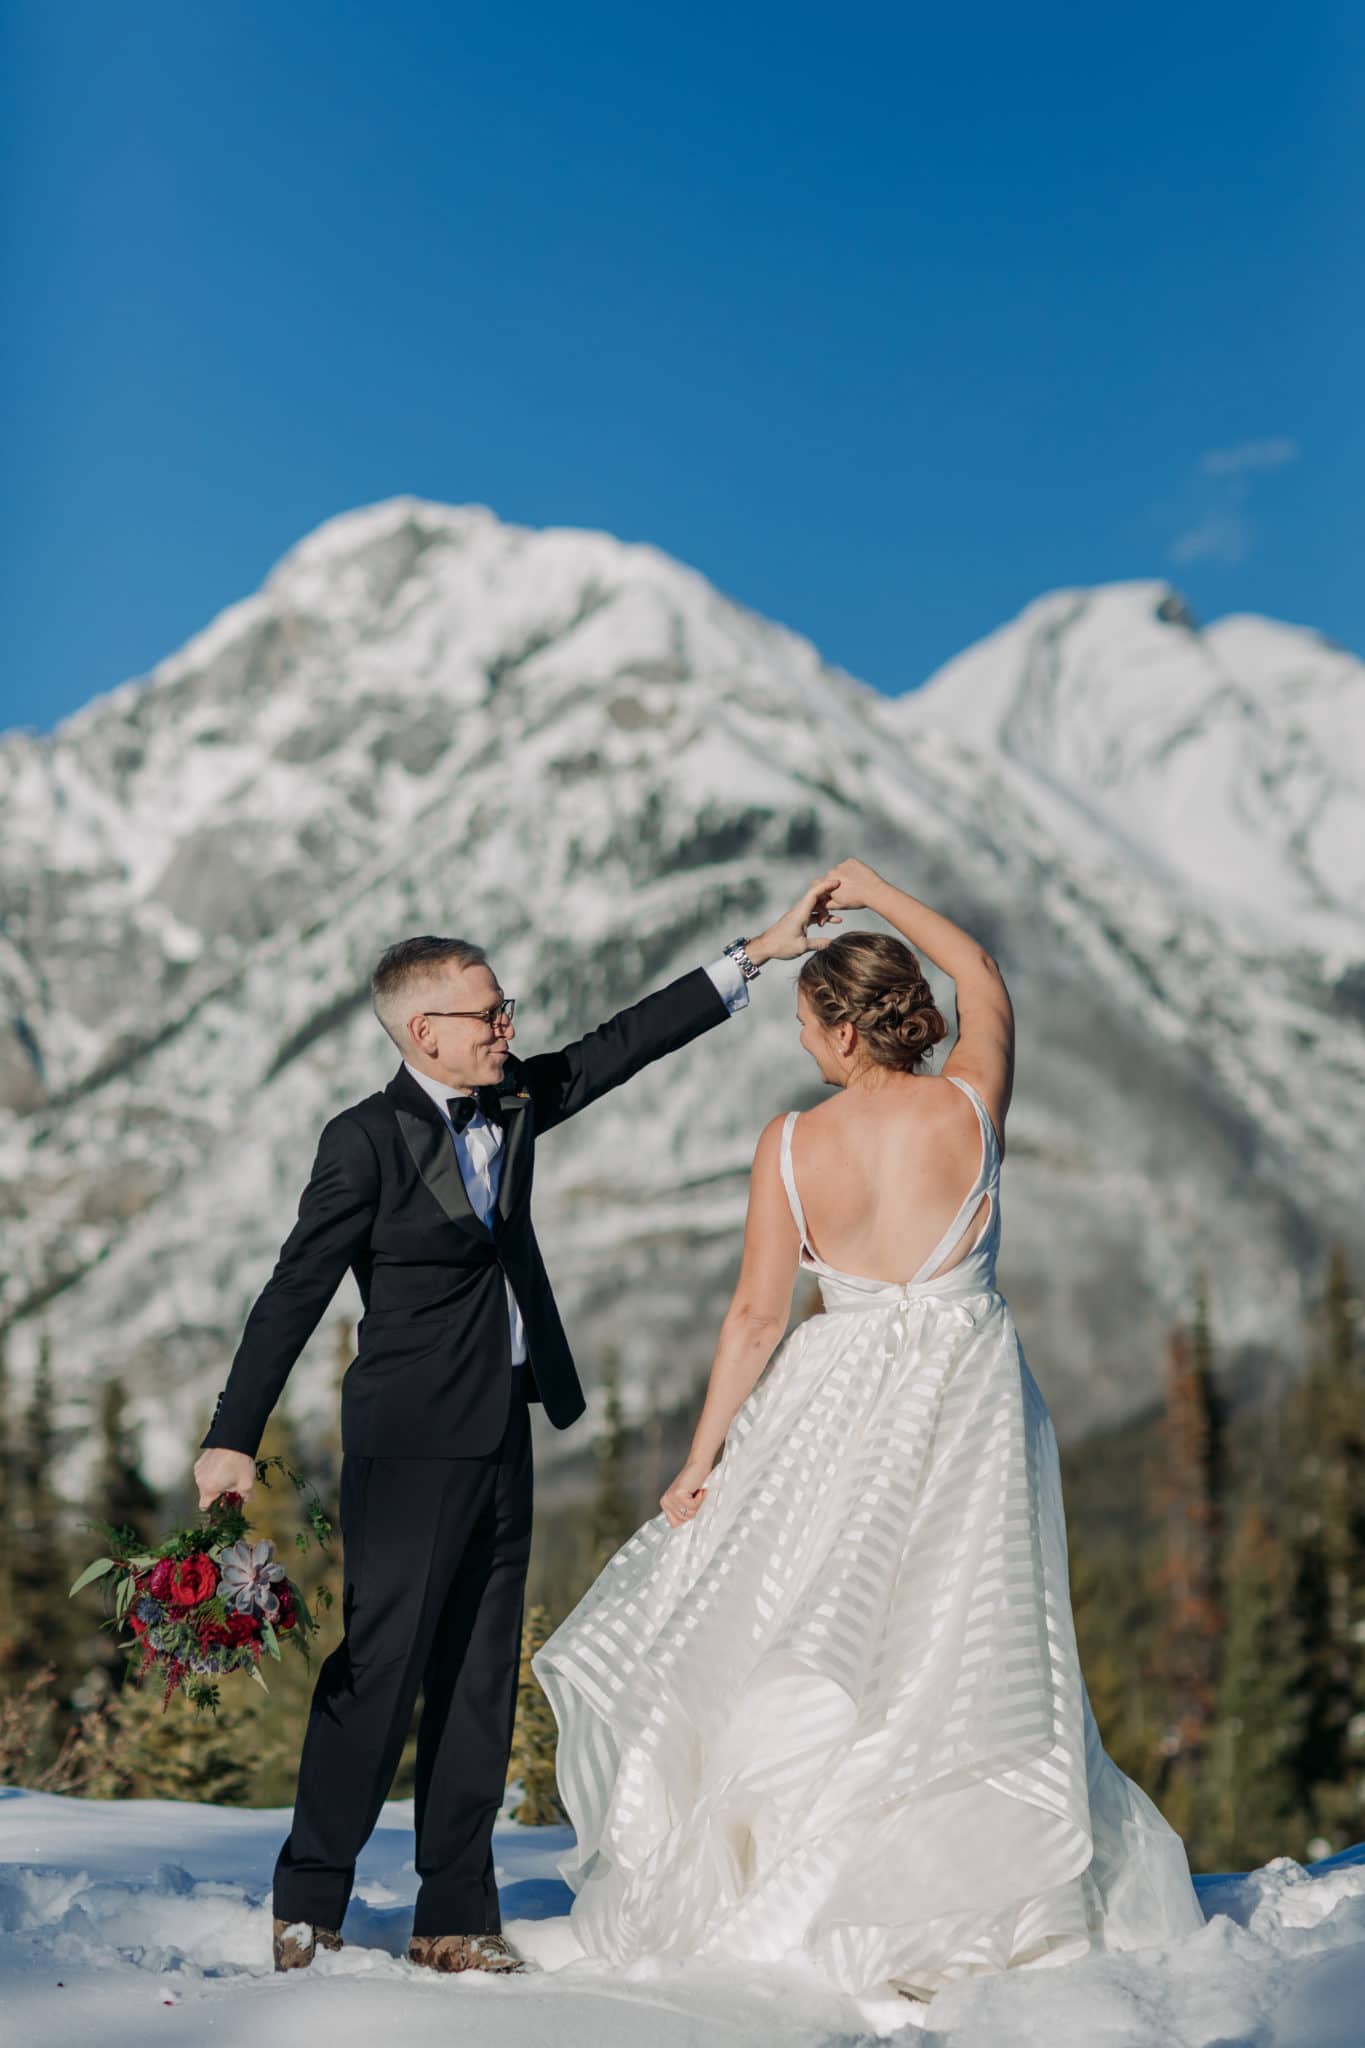 A Guide to Eloping in the Canadian Rockies | Mountain Wedding photographed by ENV Photography | Groom twirling bride in striped Hayley Paige gown in Kanananaskis near Mount Engadine Lodge